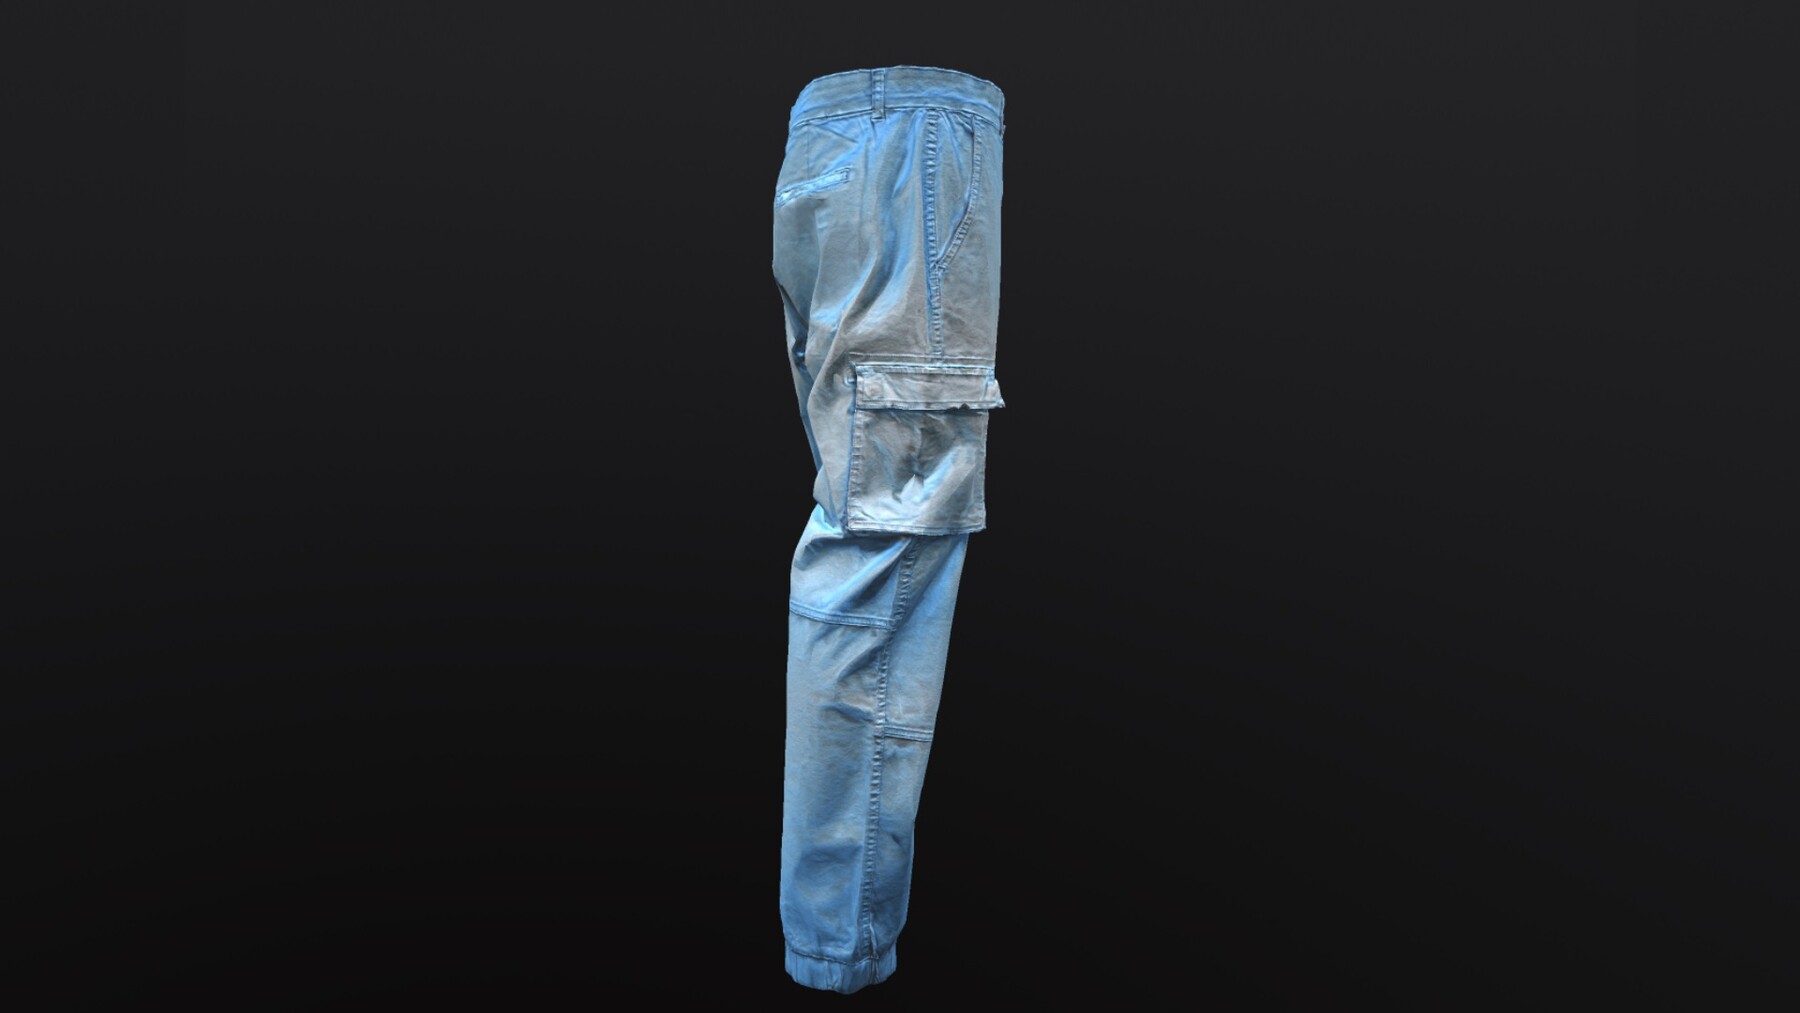 ArtStation - CARGO JEANS PBR low-poly PBR | Game Assets